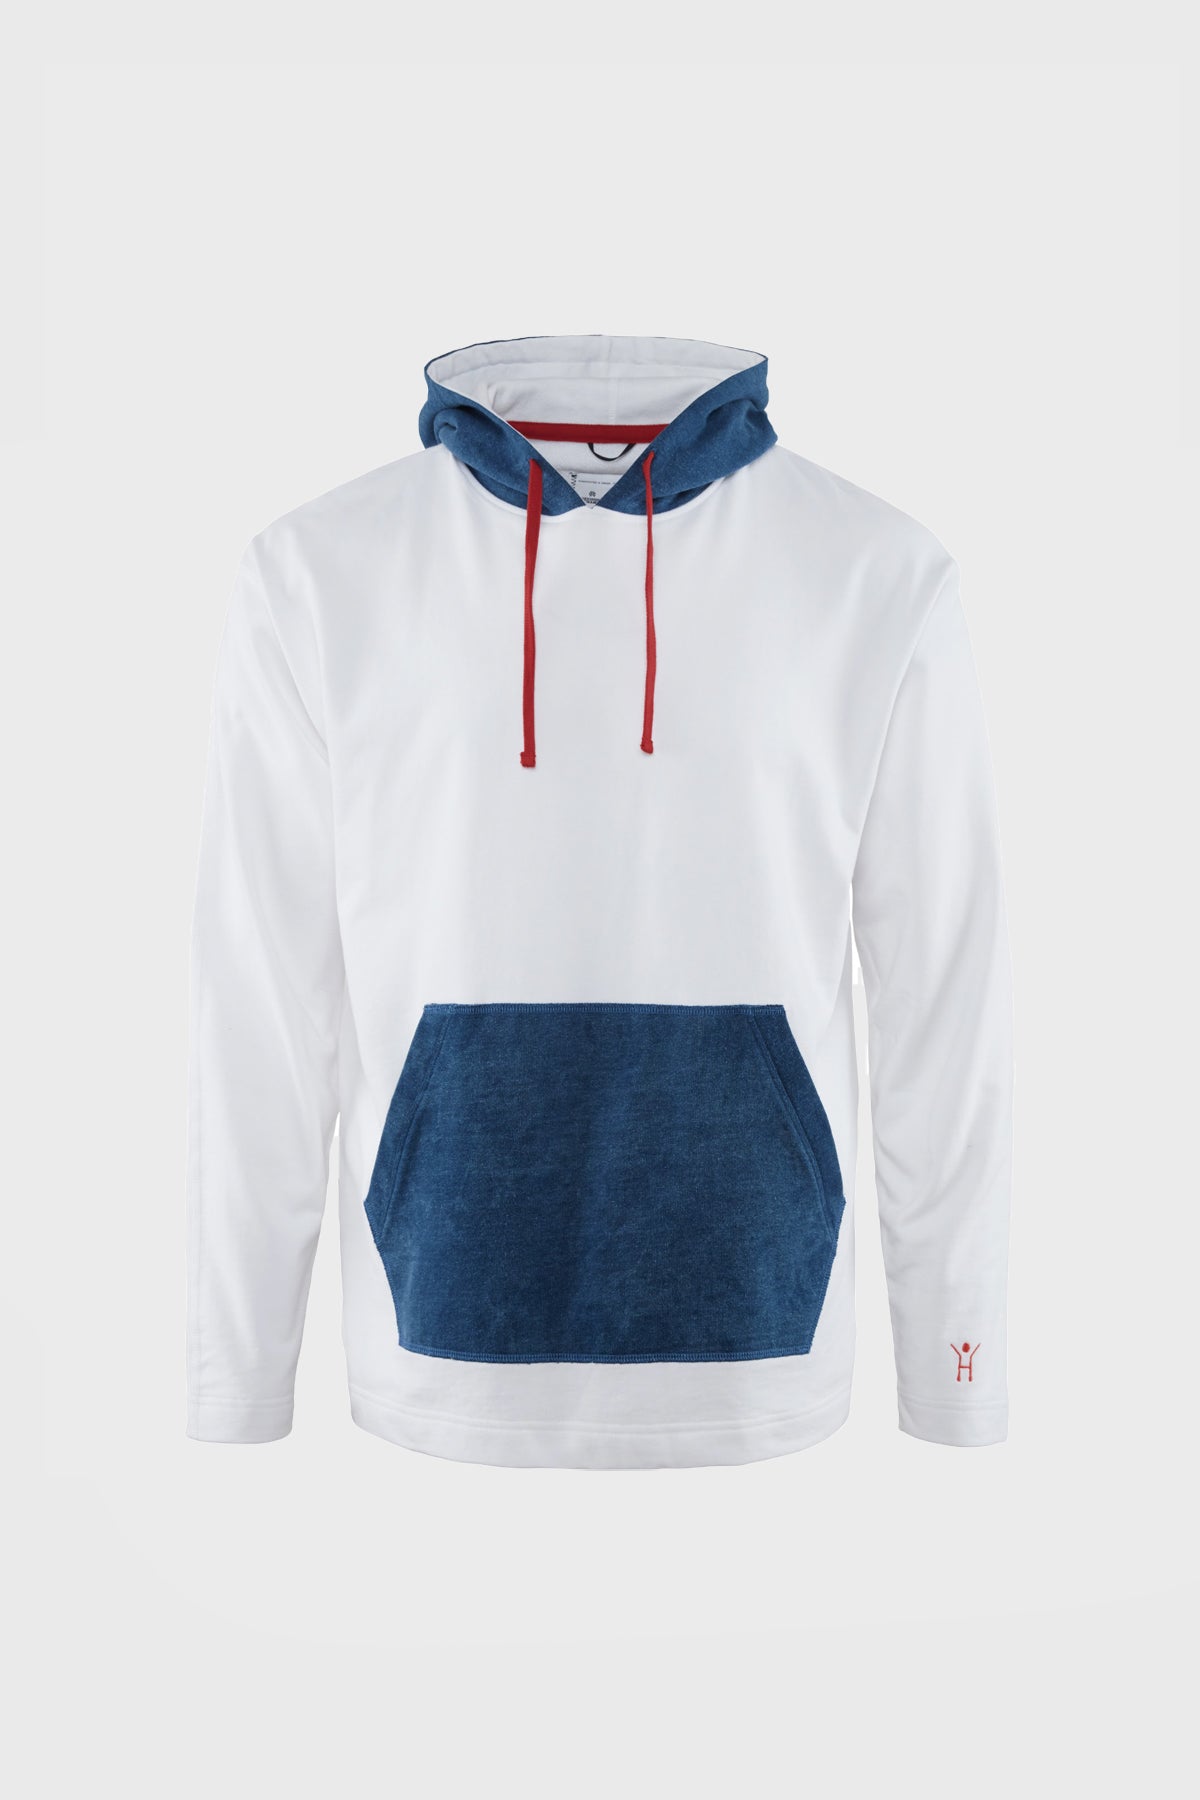 District Vision - Retreat Pullover Hoodie